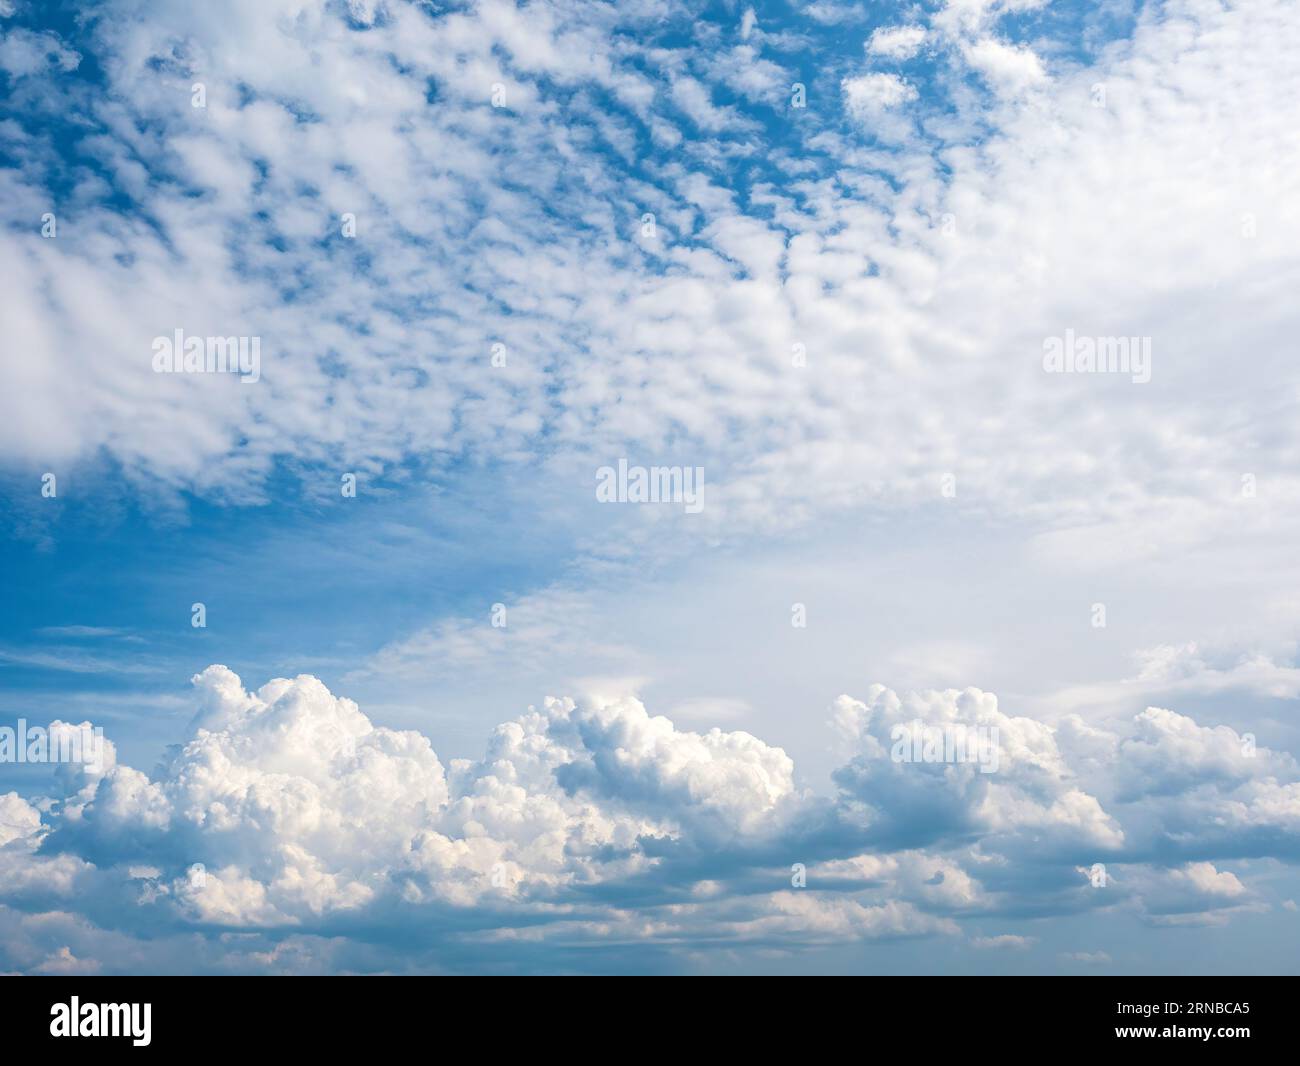 Blue sky with white clouds nature background Stock Photo